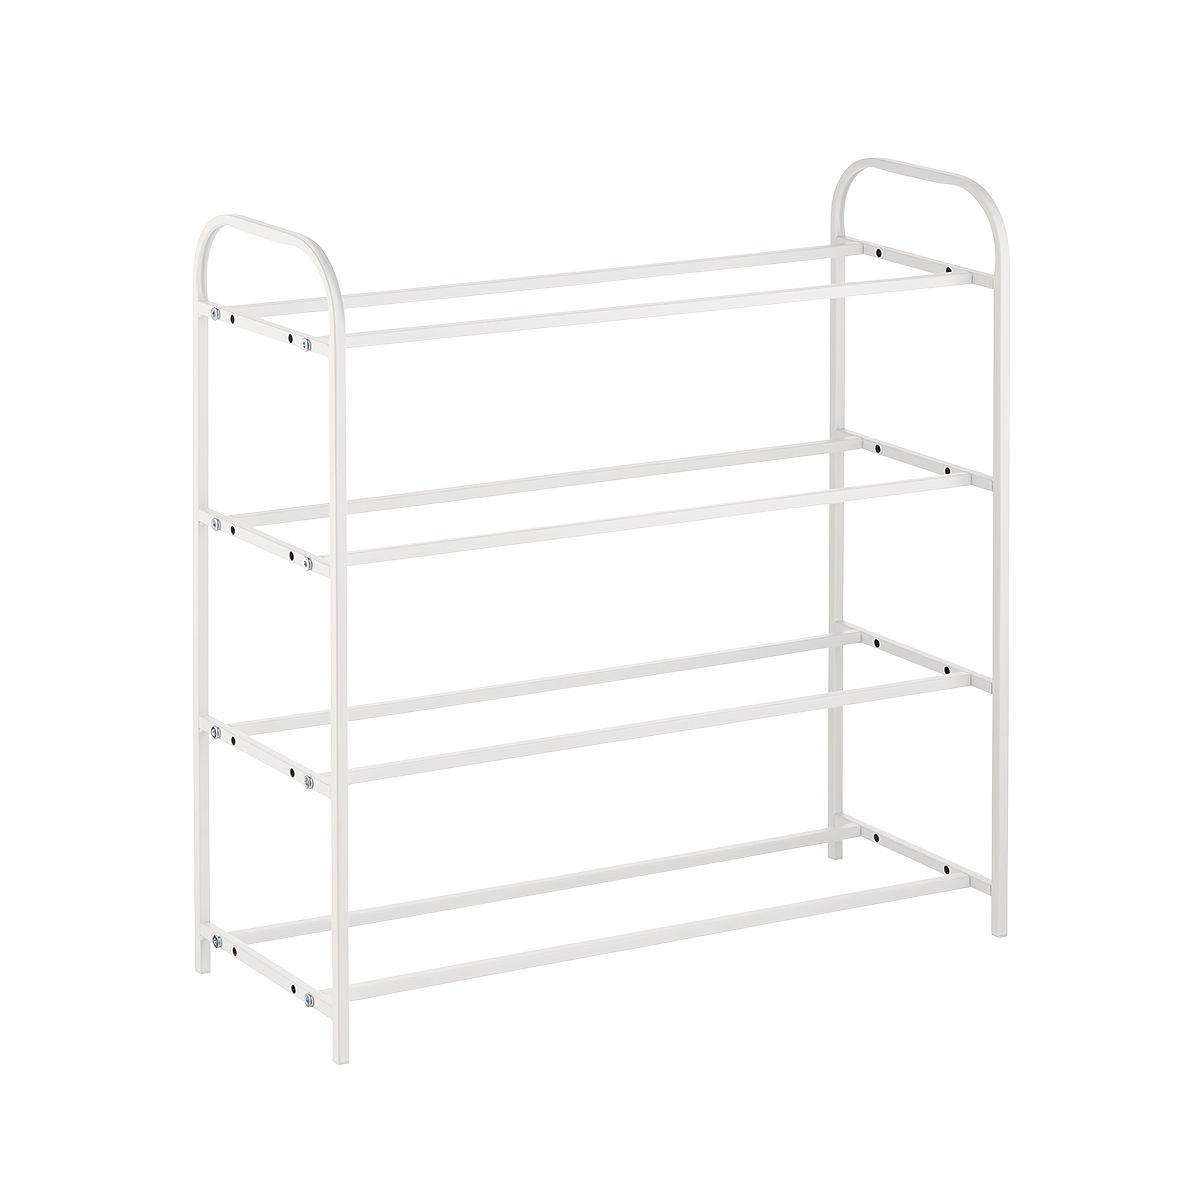 Shoe Rack with Adjustable Bars | The Container Store